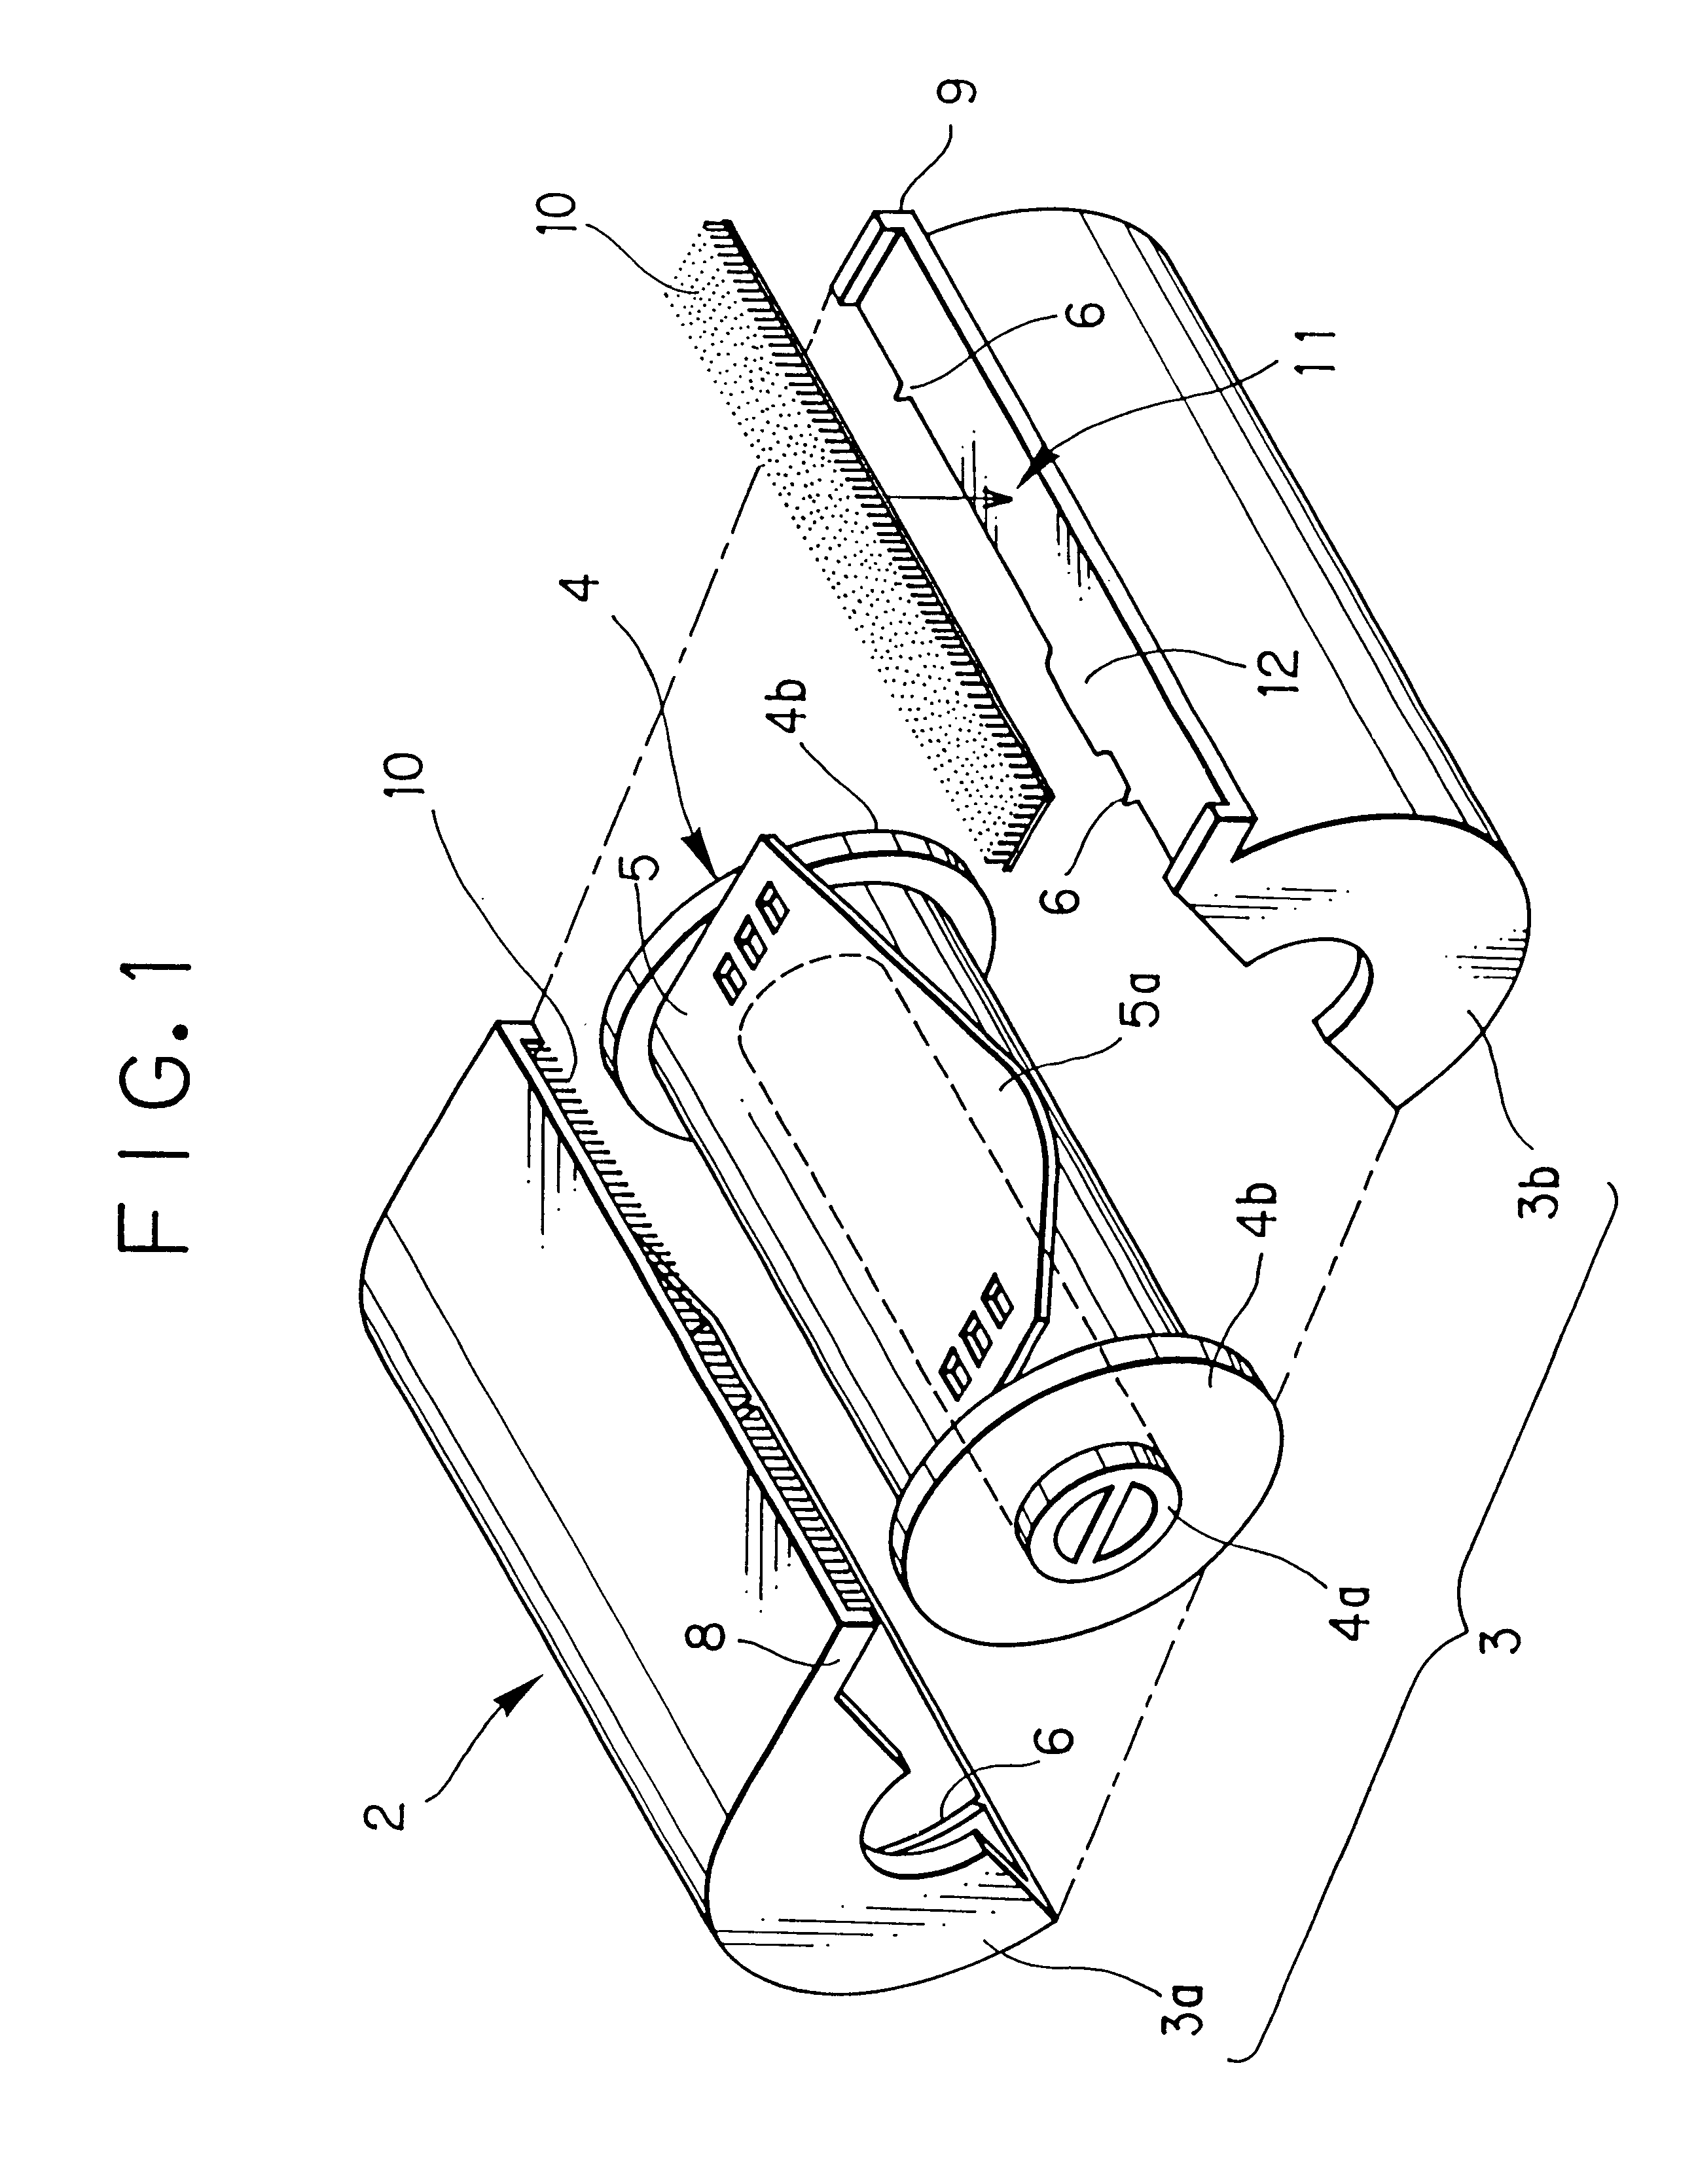 Apparatus for manufacturing photographic film and photographic film cassette